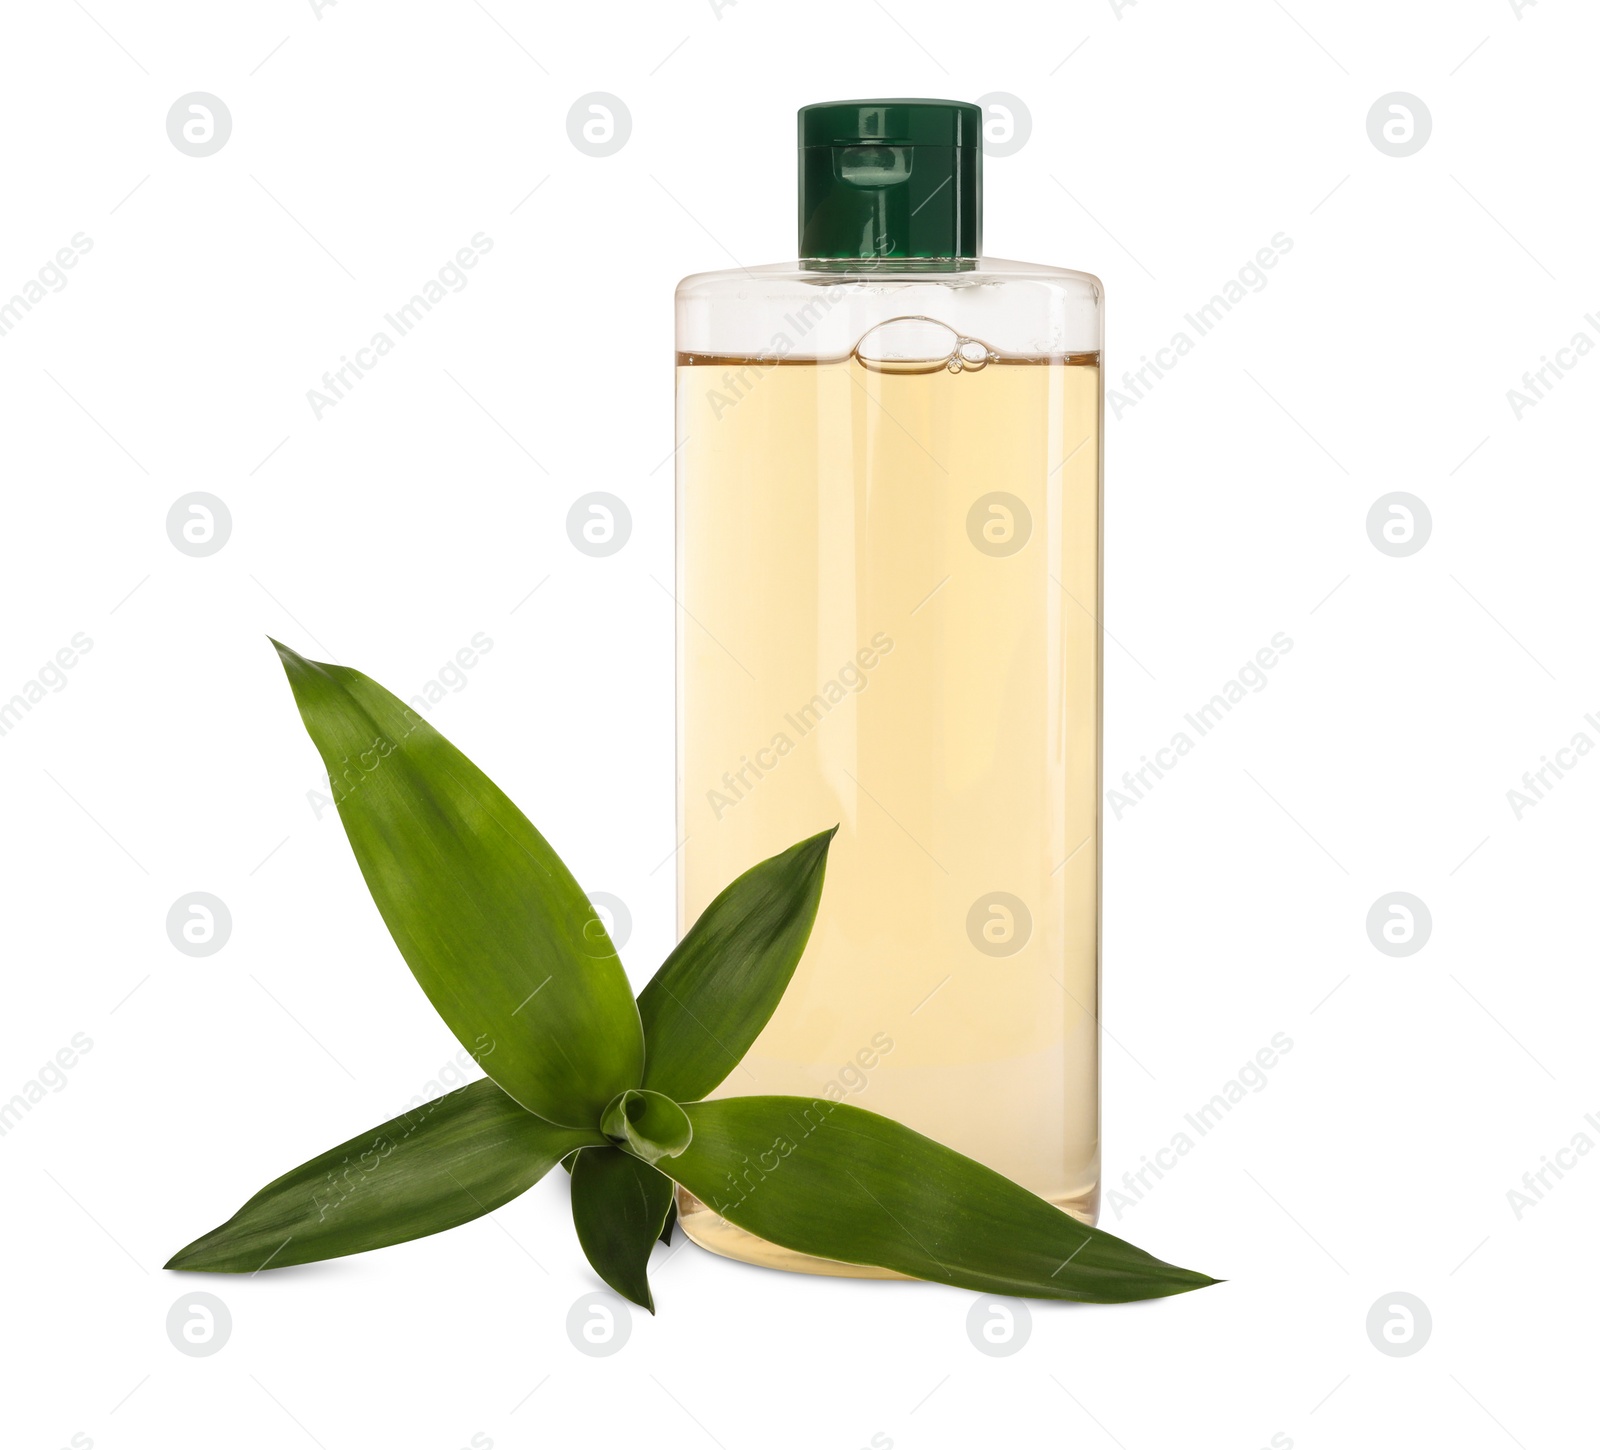 Photo of Bottle of micellar cleansing water and green plant on white background